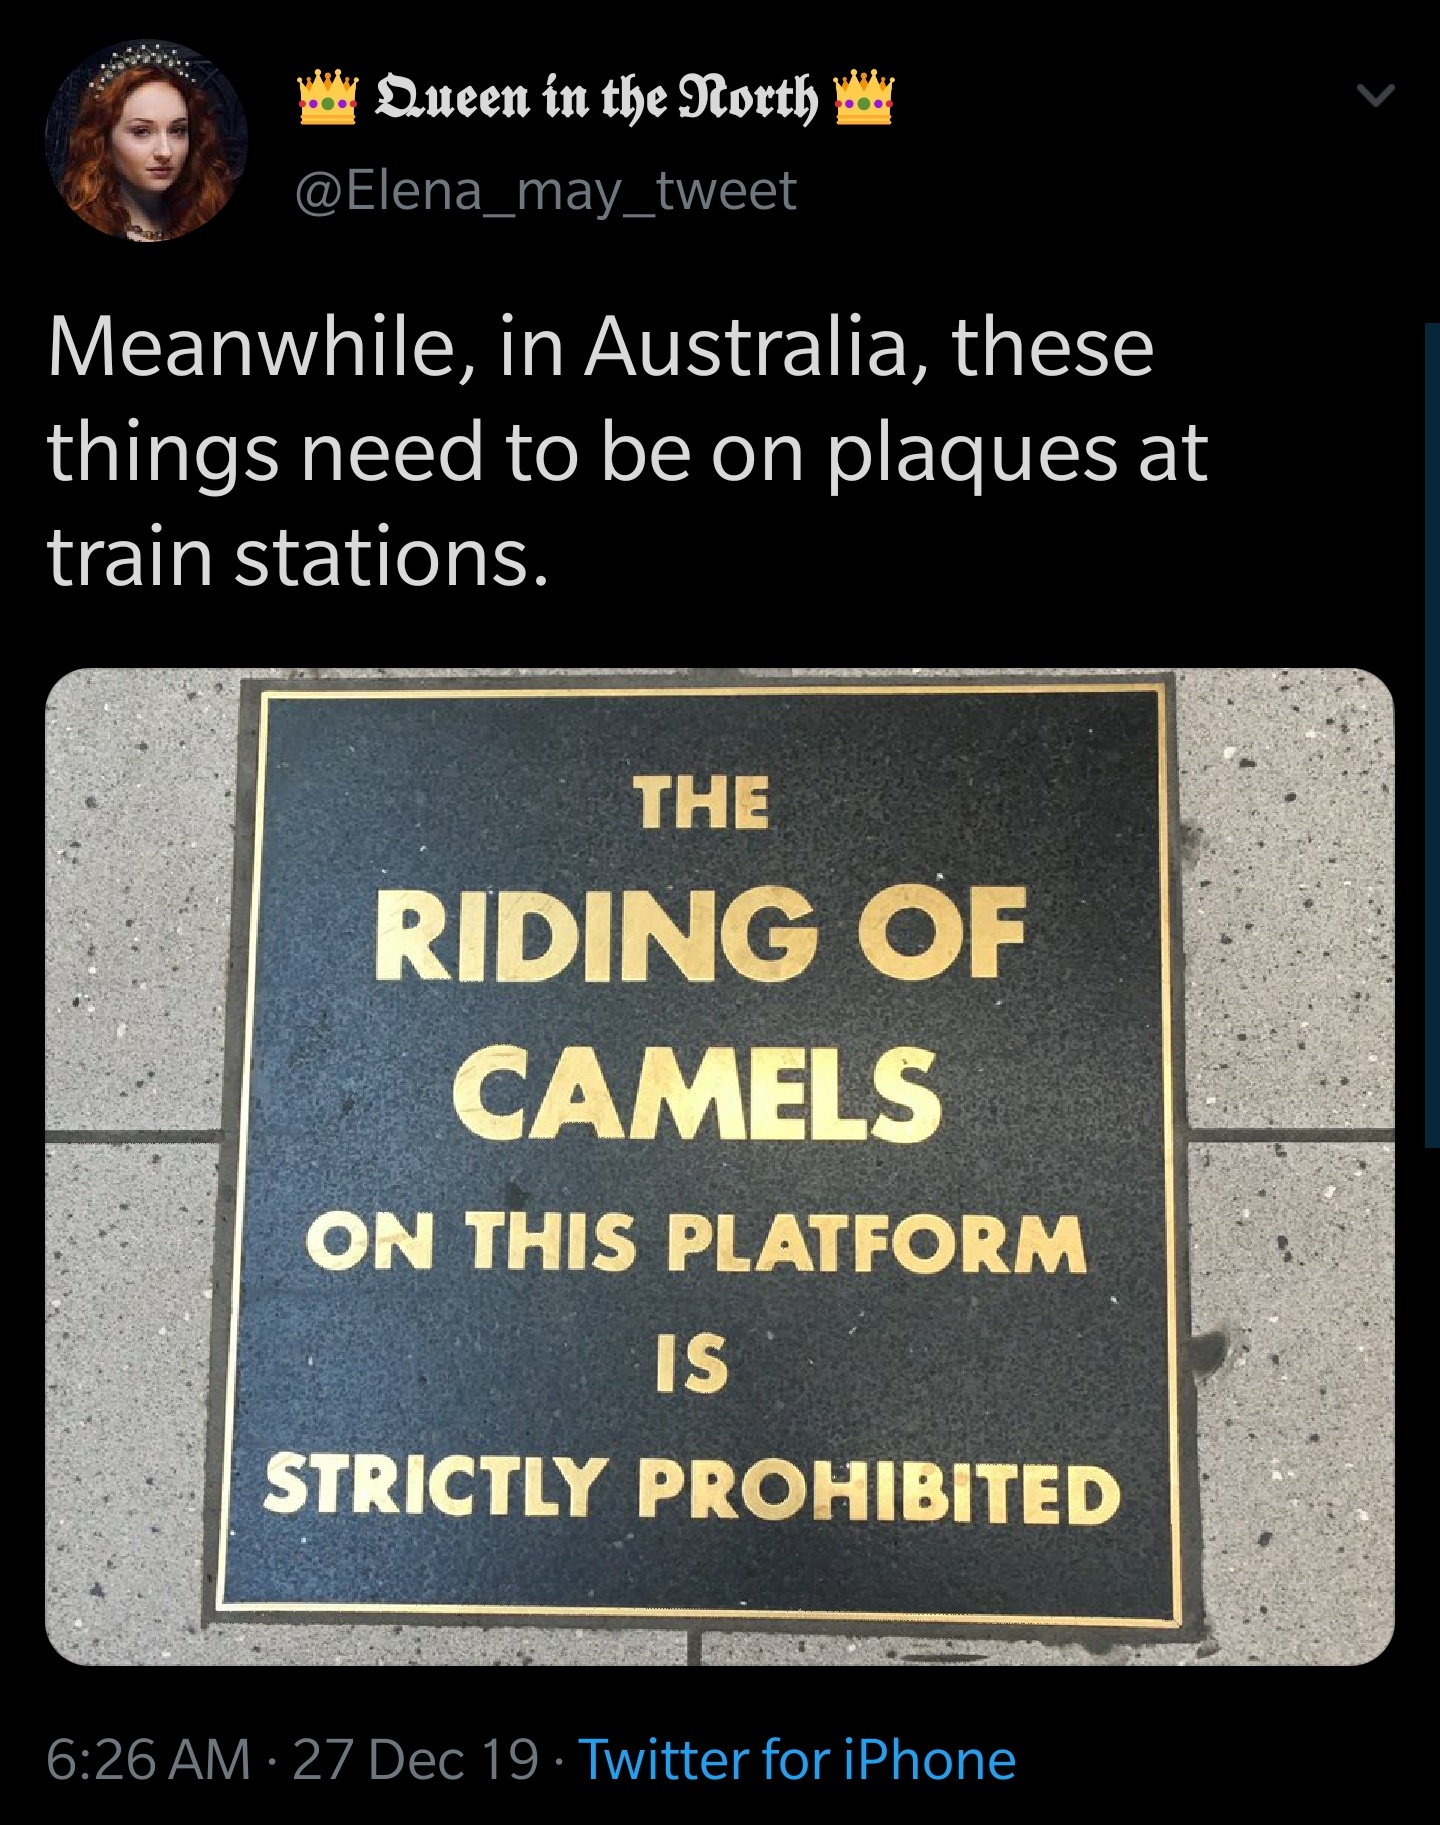 united colors of ska vol - Queen in the North Meanwhile, in Australia, these things need to be on plaques at train stations. The Riding Of Camels On This Platform Is Strictly Prohibited 27 Dec 19. Twitter for iPhone